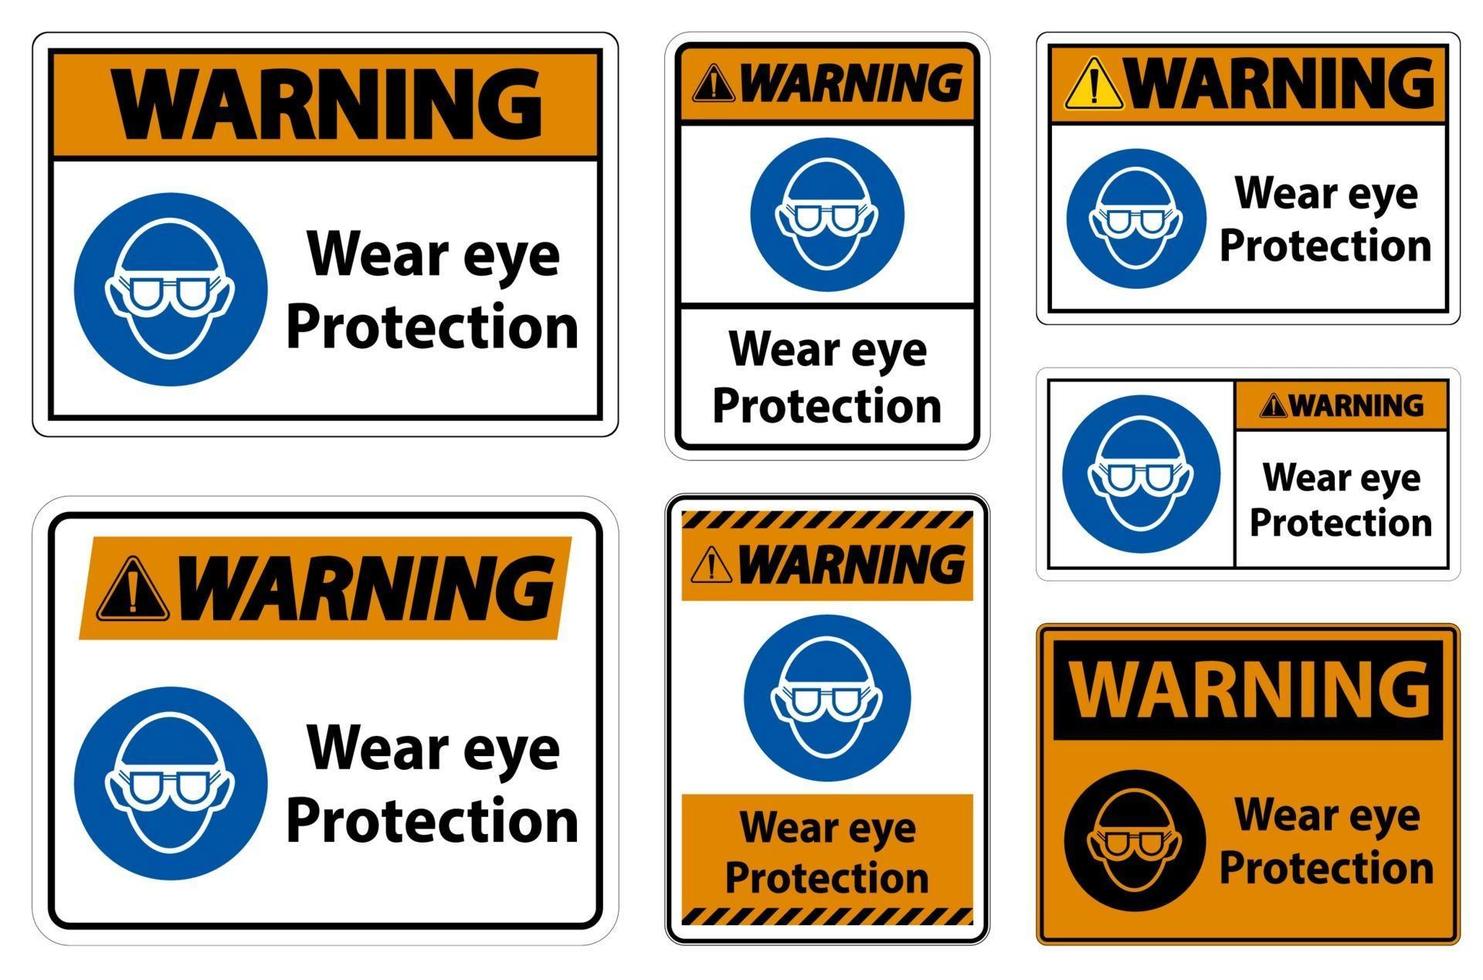 Warning Wear eye protection on white background vector